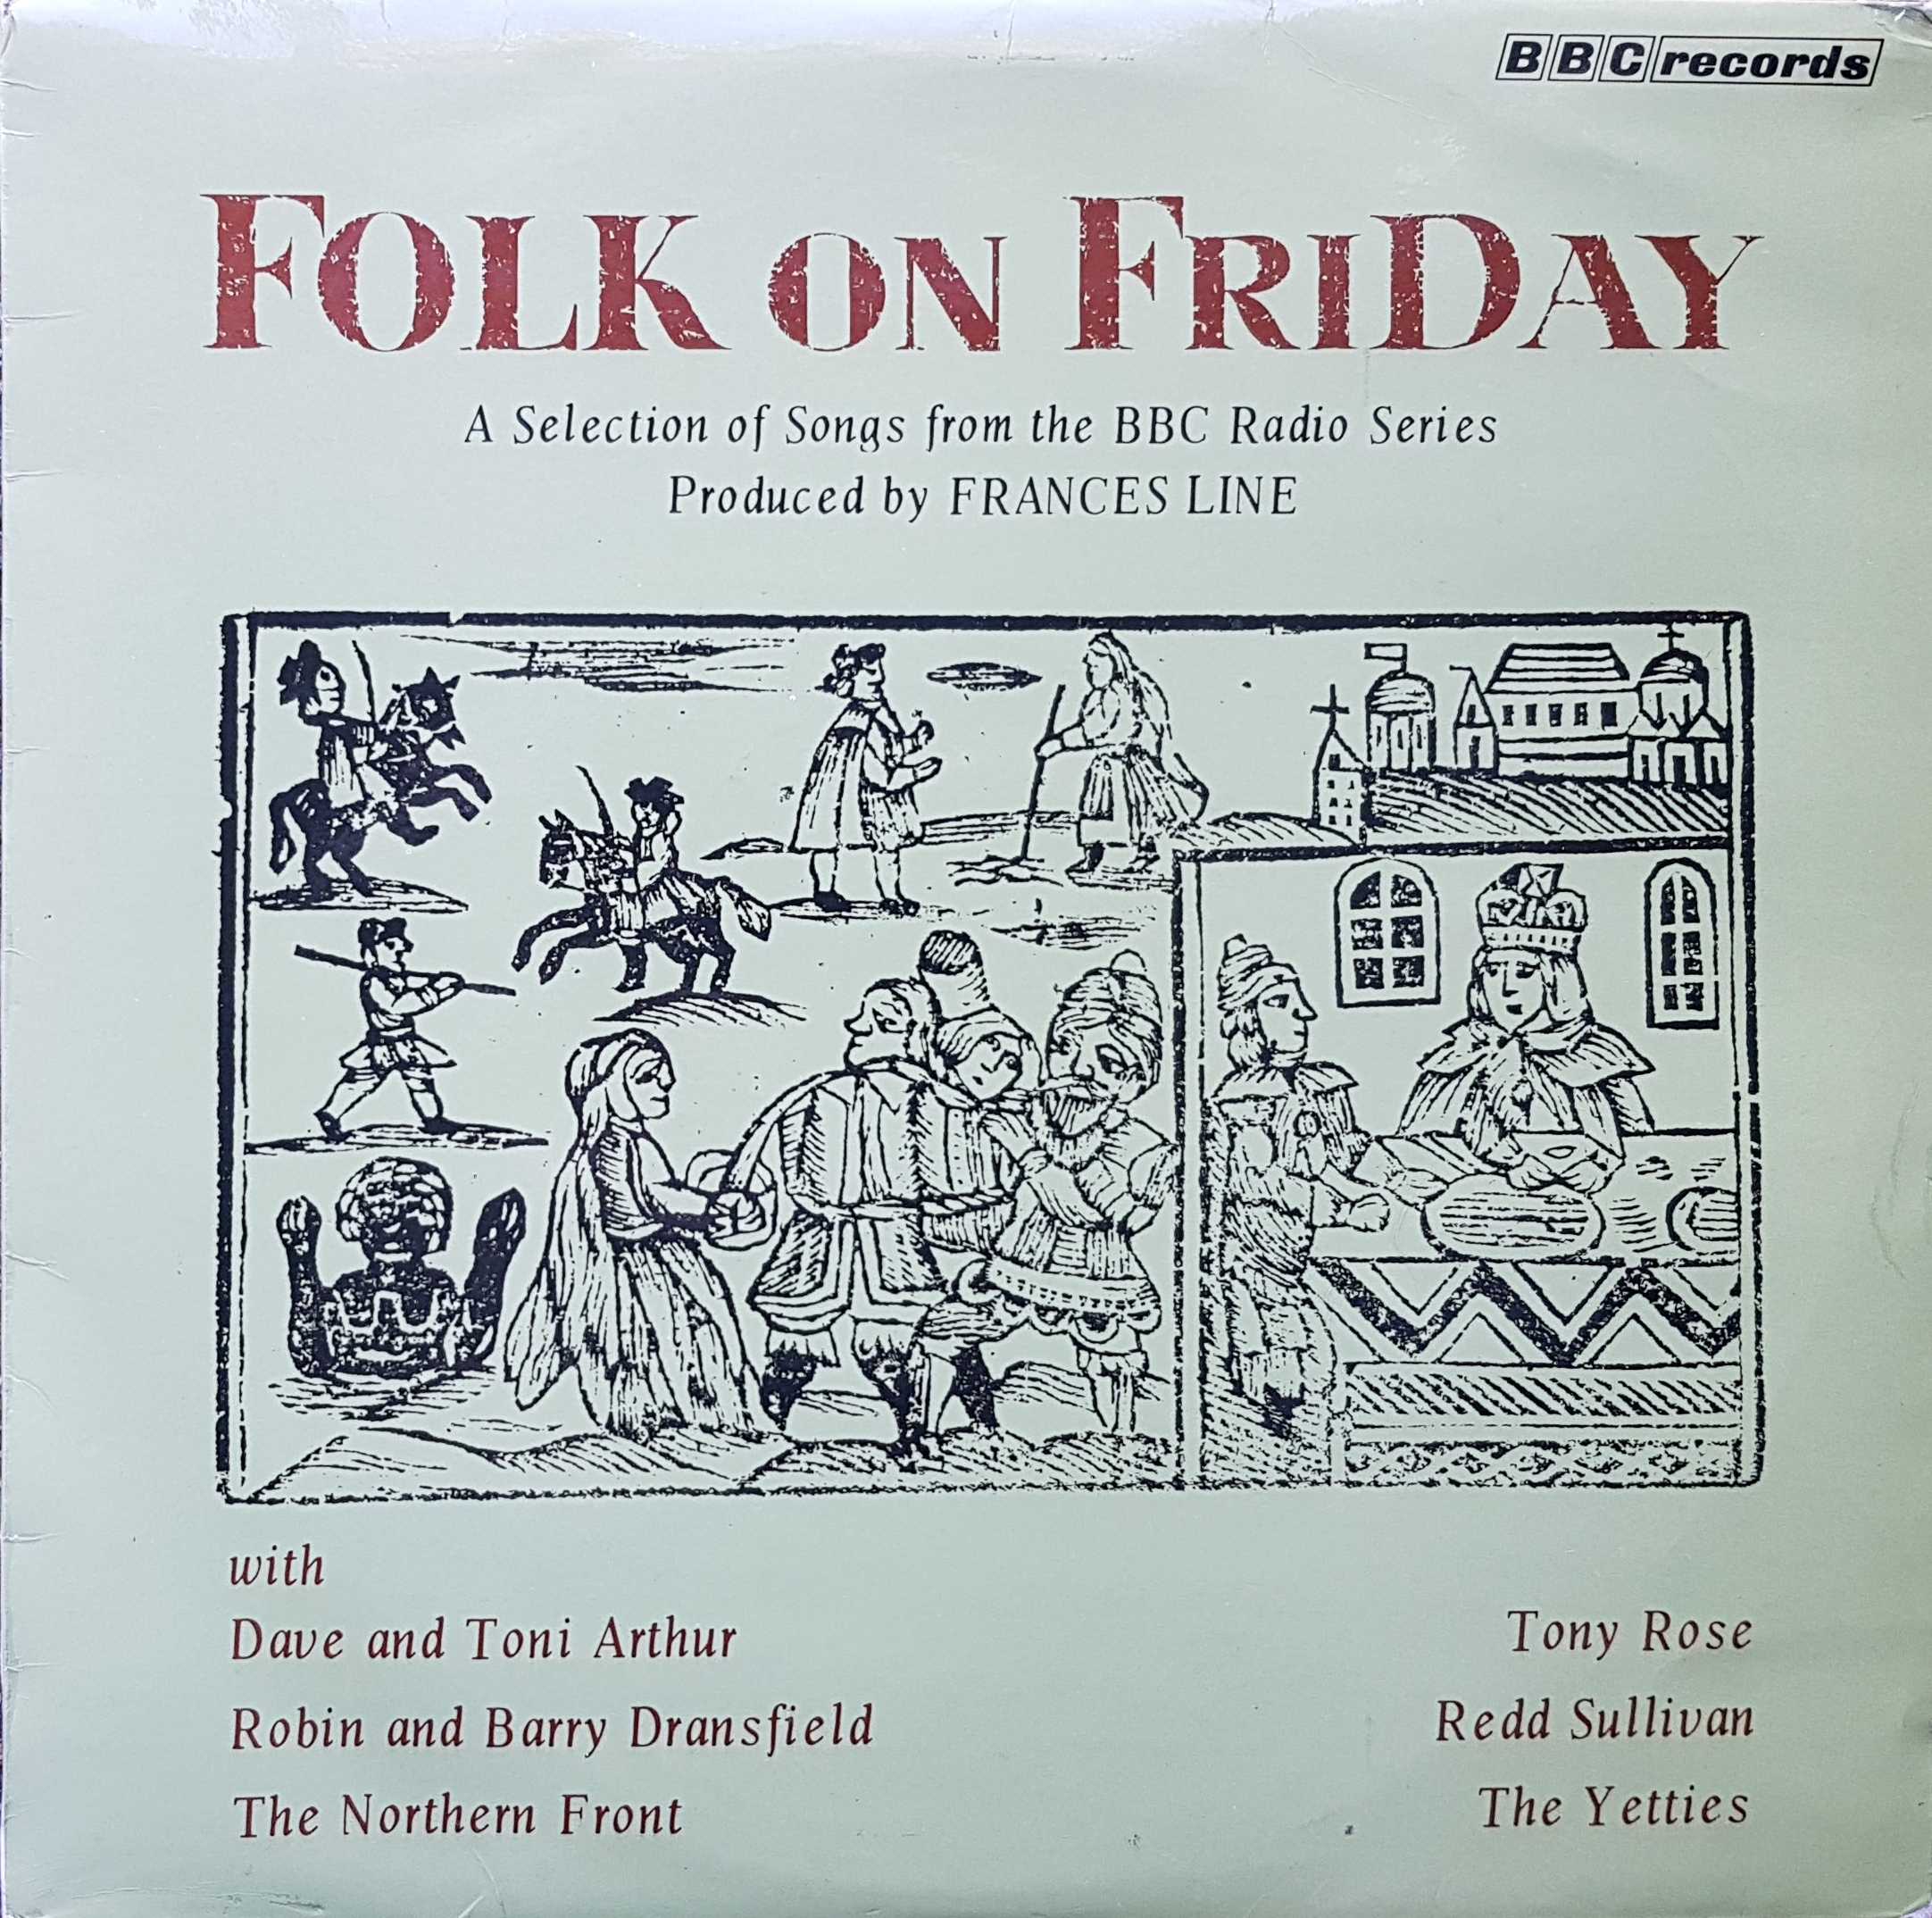 Picture of REC 95 Folk on Friday by artist Various from the BBC albums - Records and Tapes library